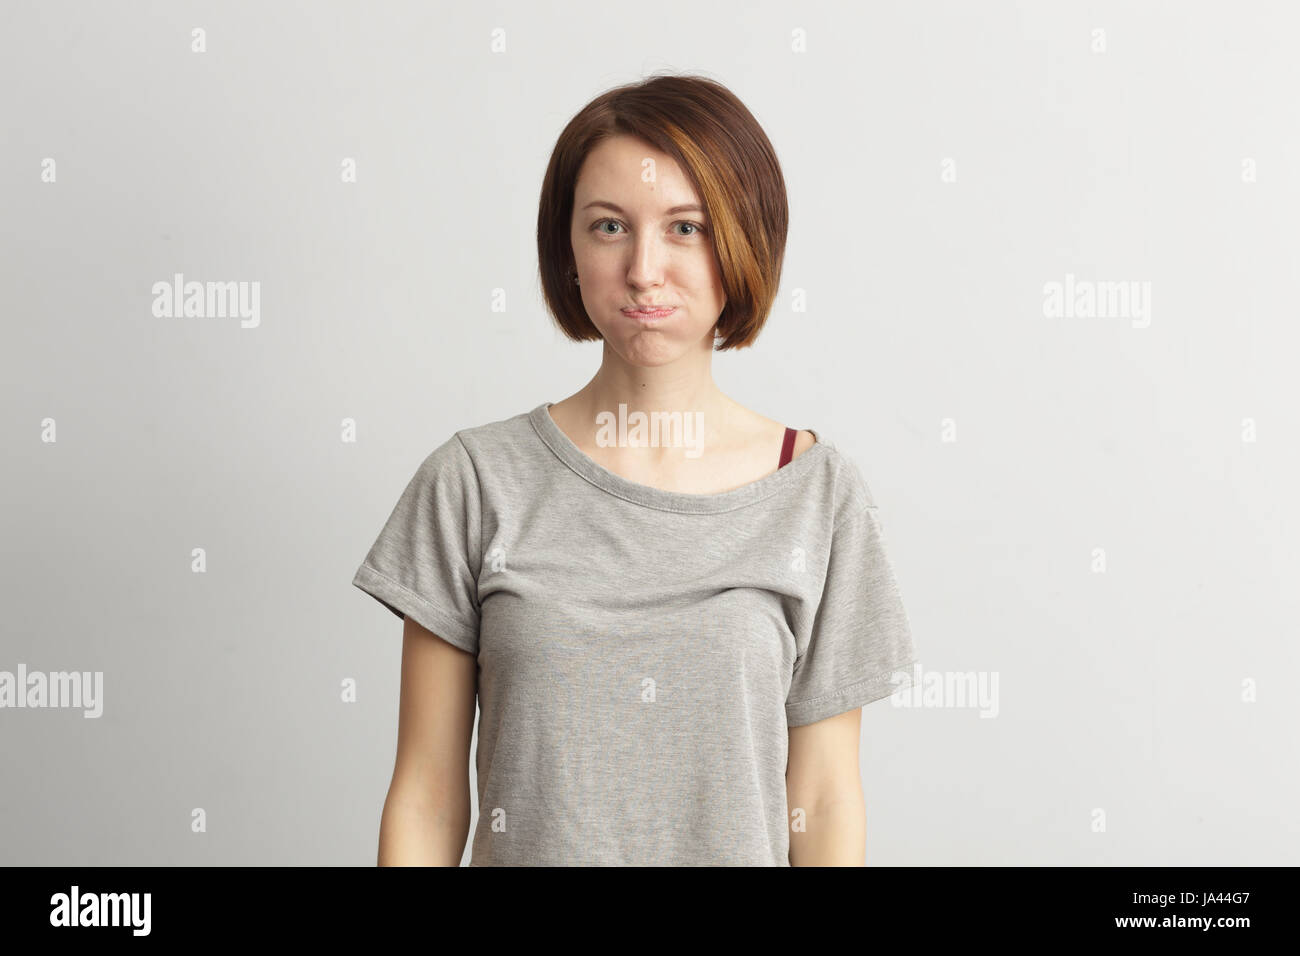 Girl puffed out her cheeks. She is offended and dissatisfied. Stock Photo